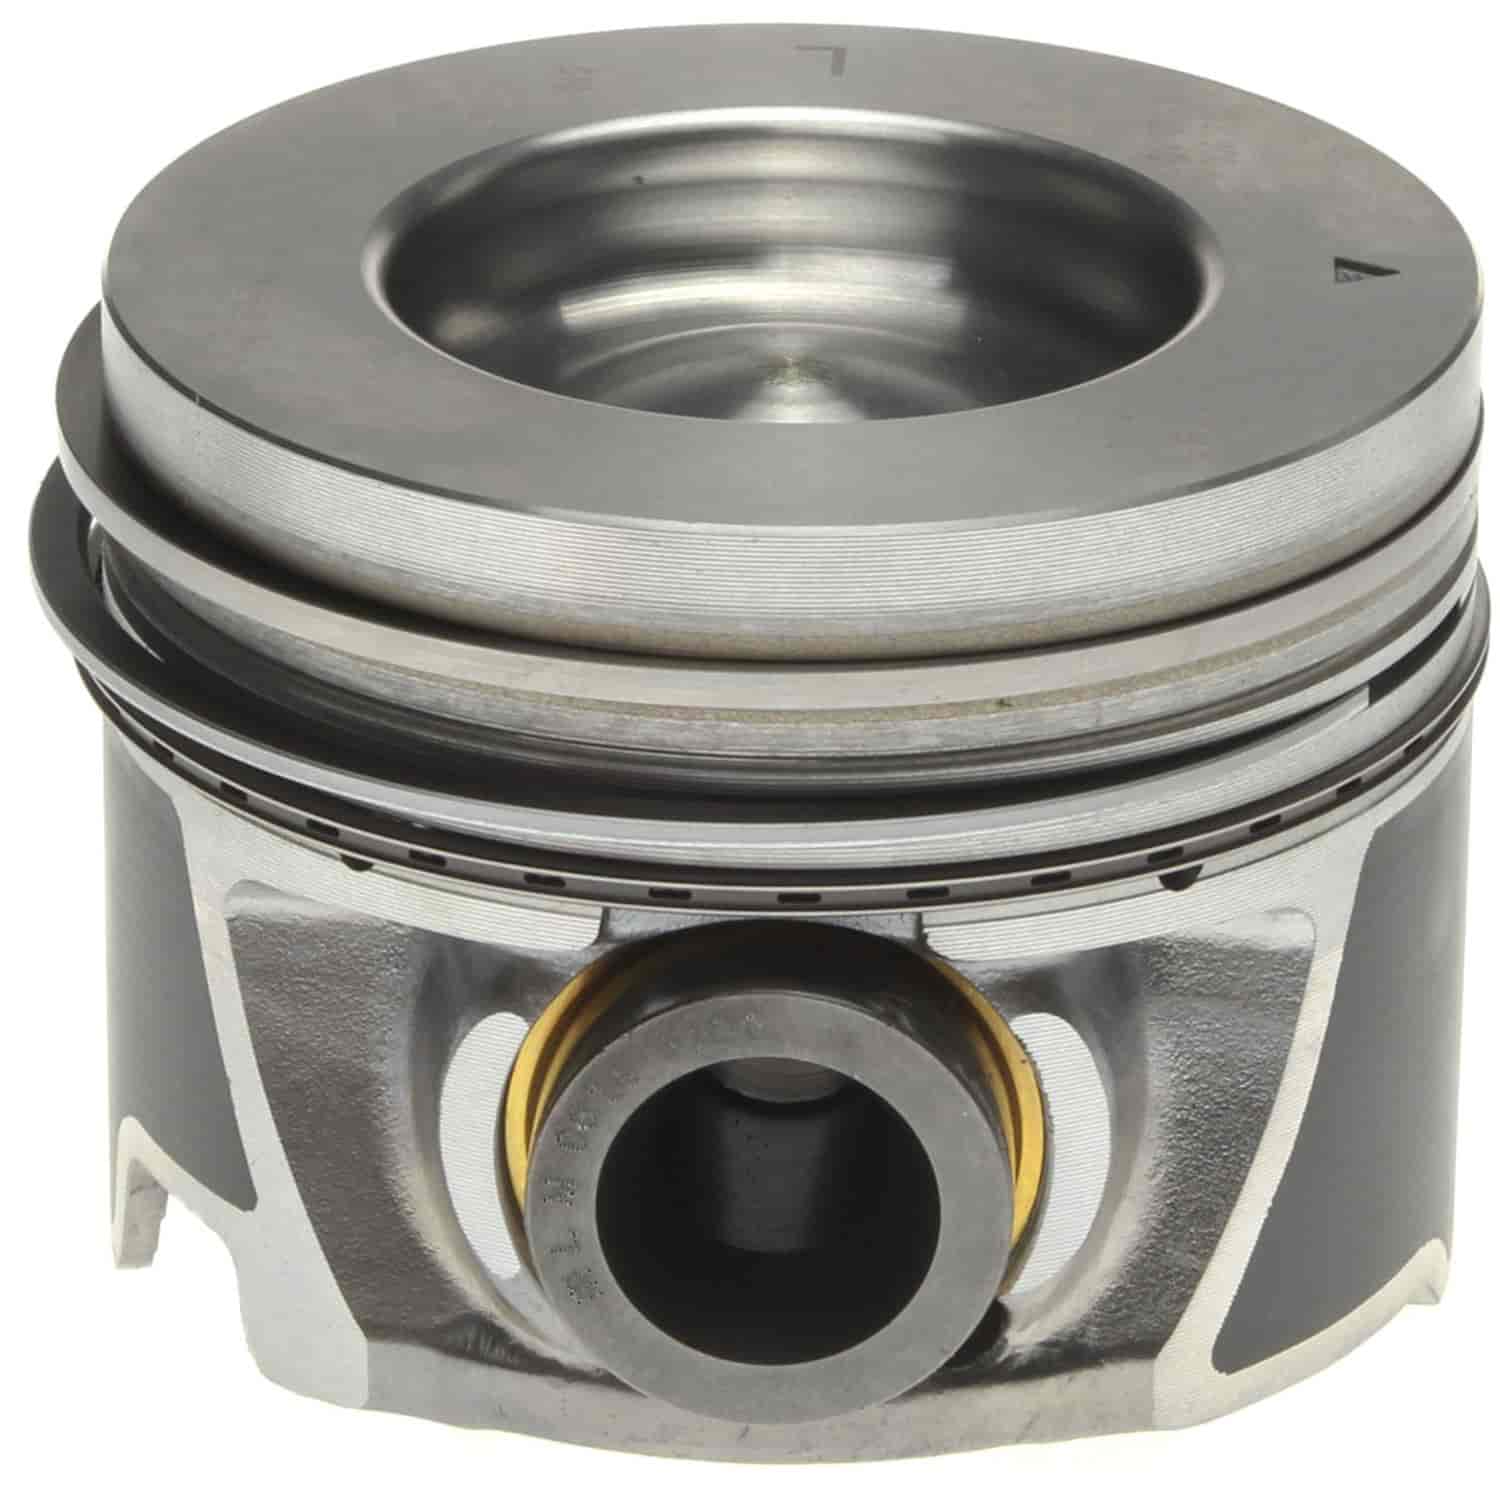 Piston Set With Rings 2006-2010 Chevy/GMC Duramax Diesel V8 6.6L Left Bank with 4.075" Bore (+.020")